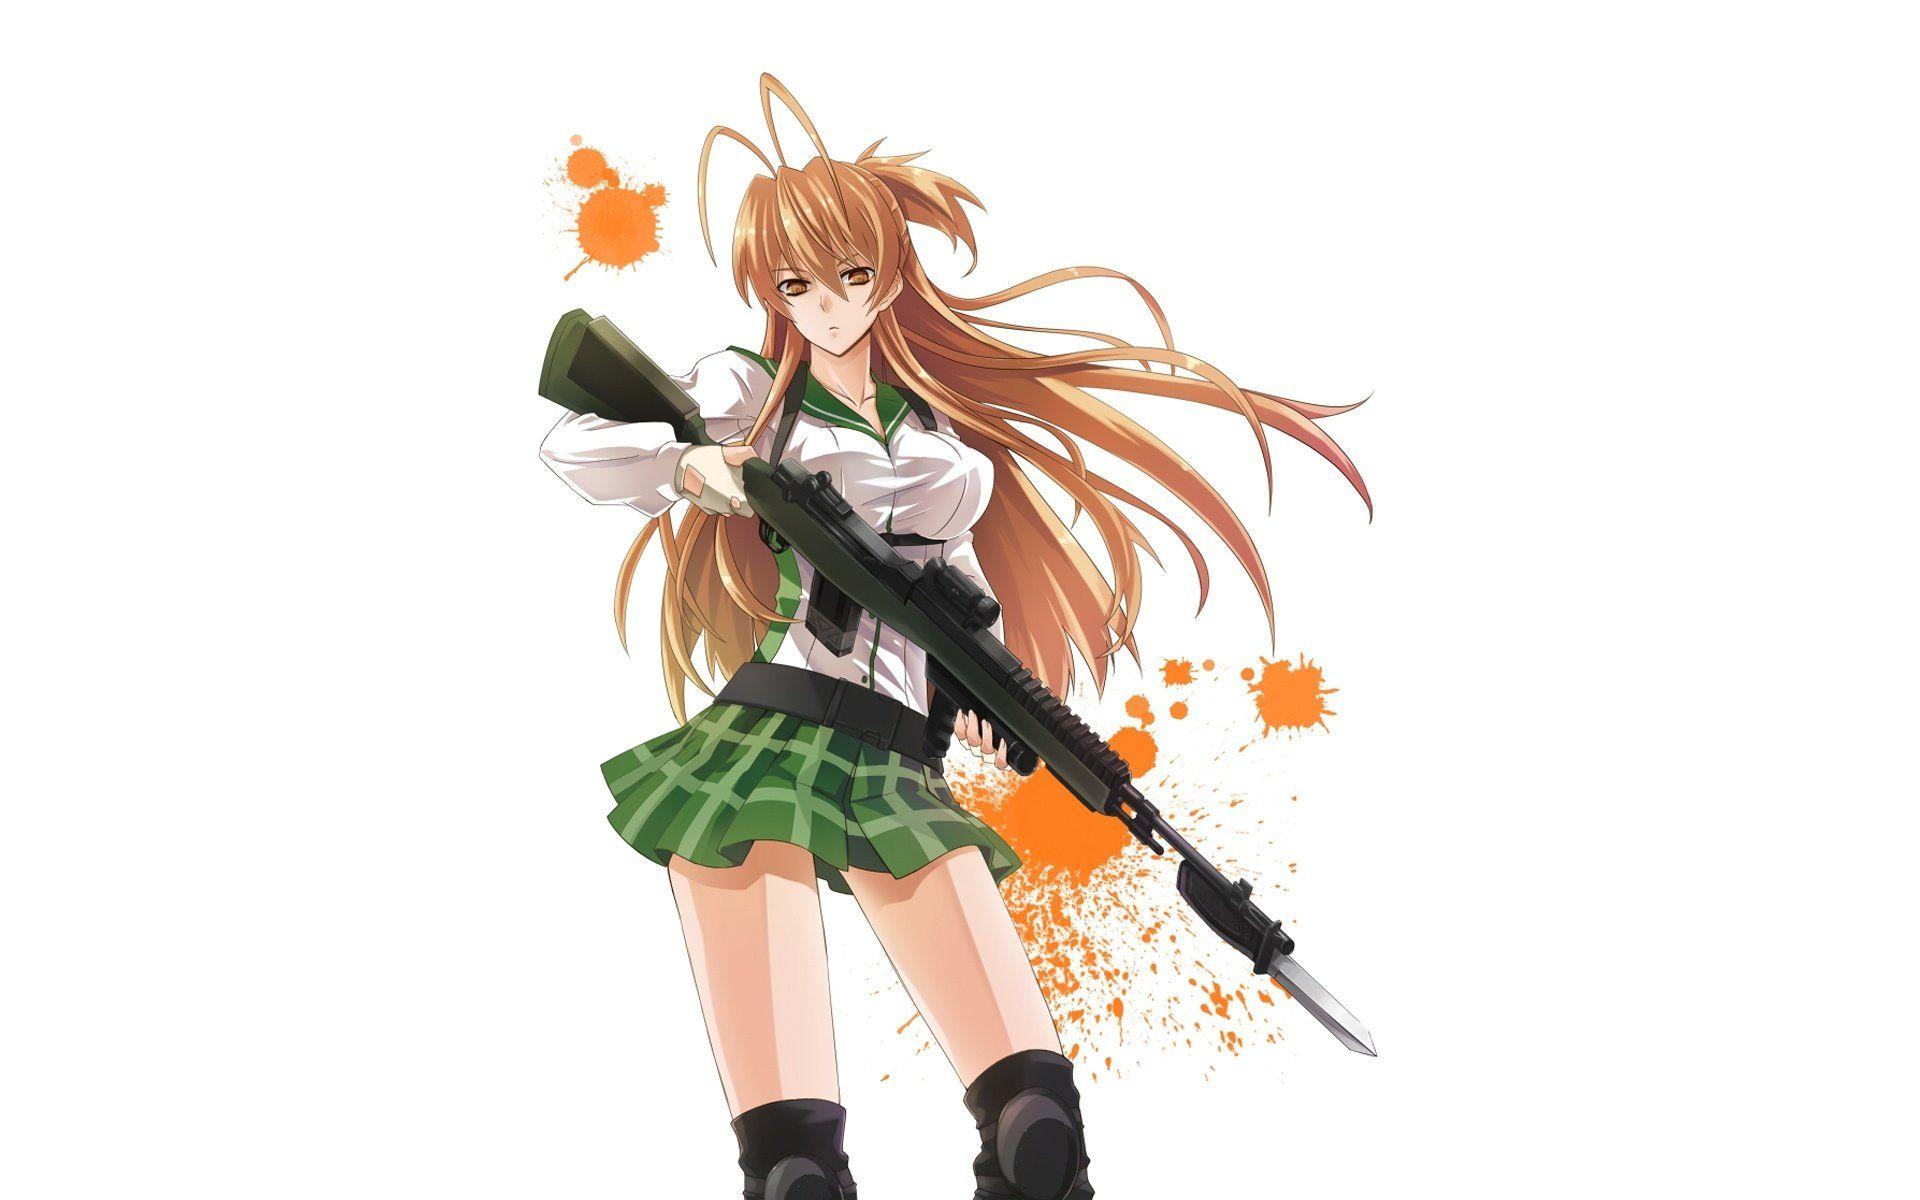 Highschool Of The Dead Wallpapers Wallpaper Cave